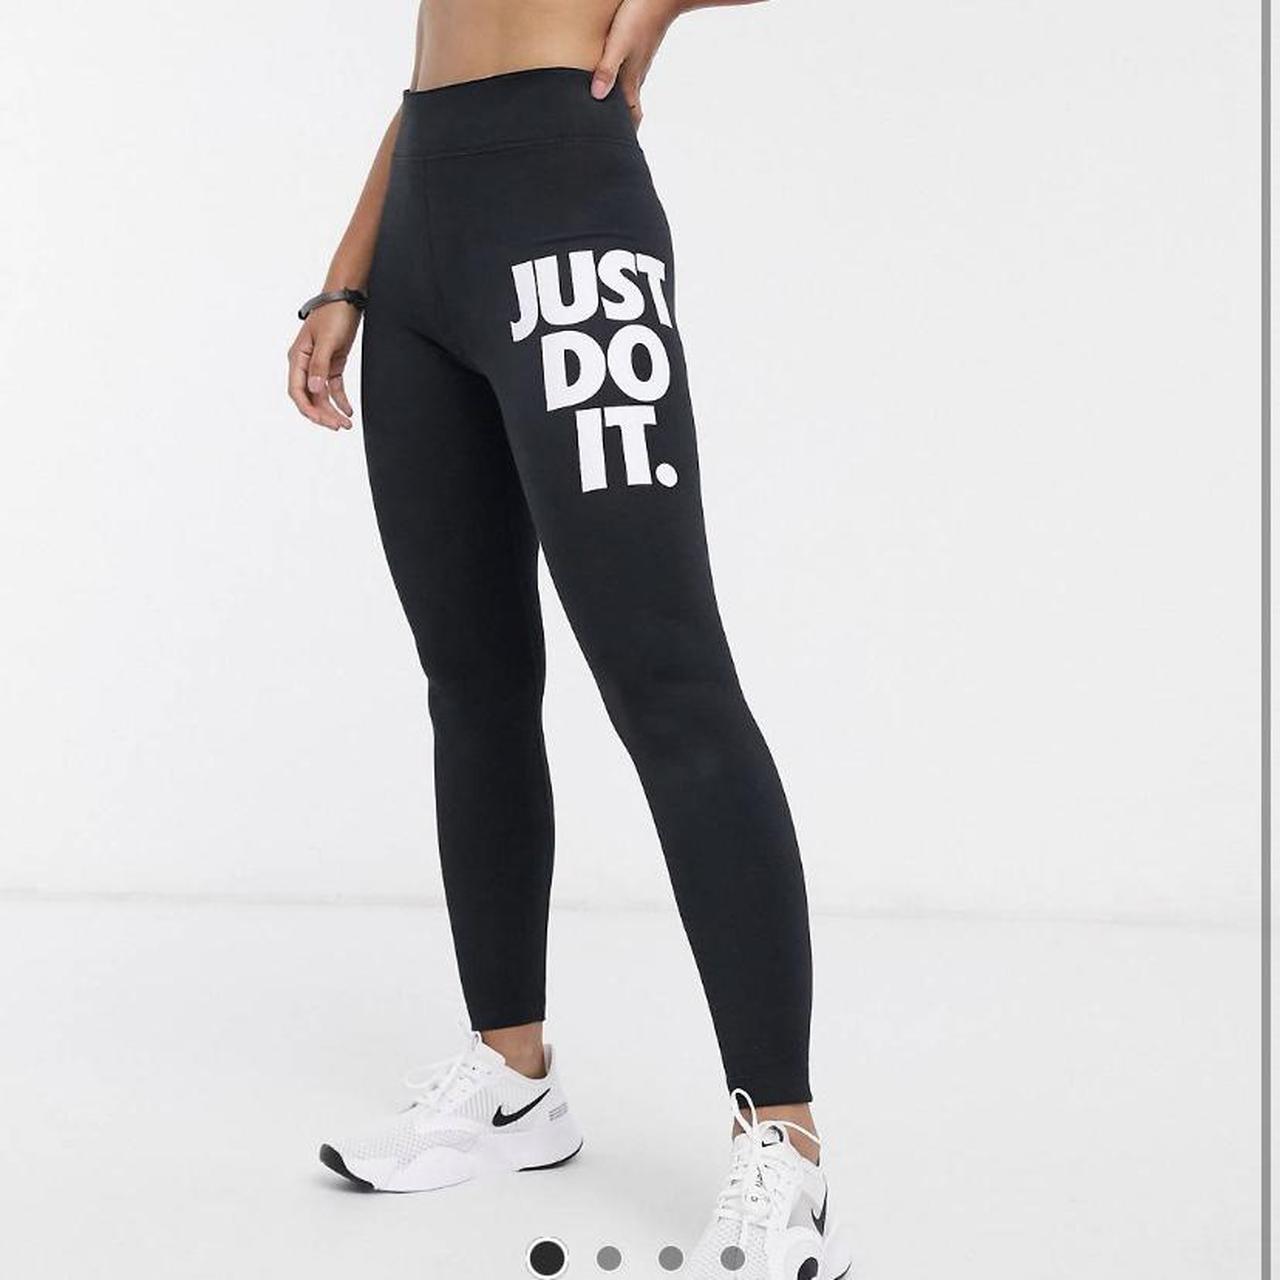 Nike high waisted 7/8 leggings in black with just do - Depop